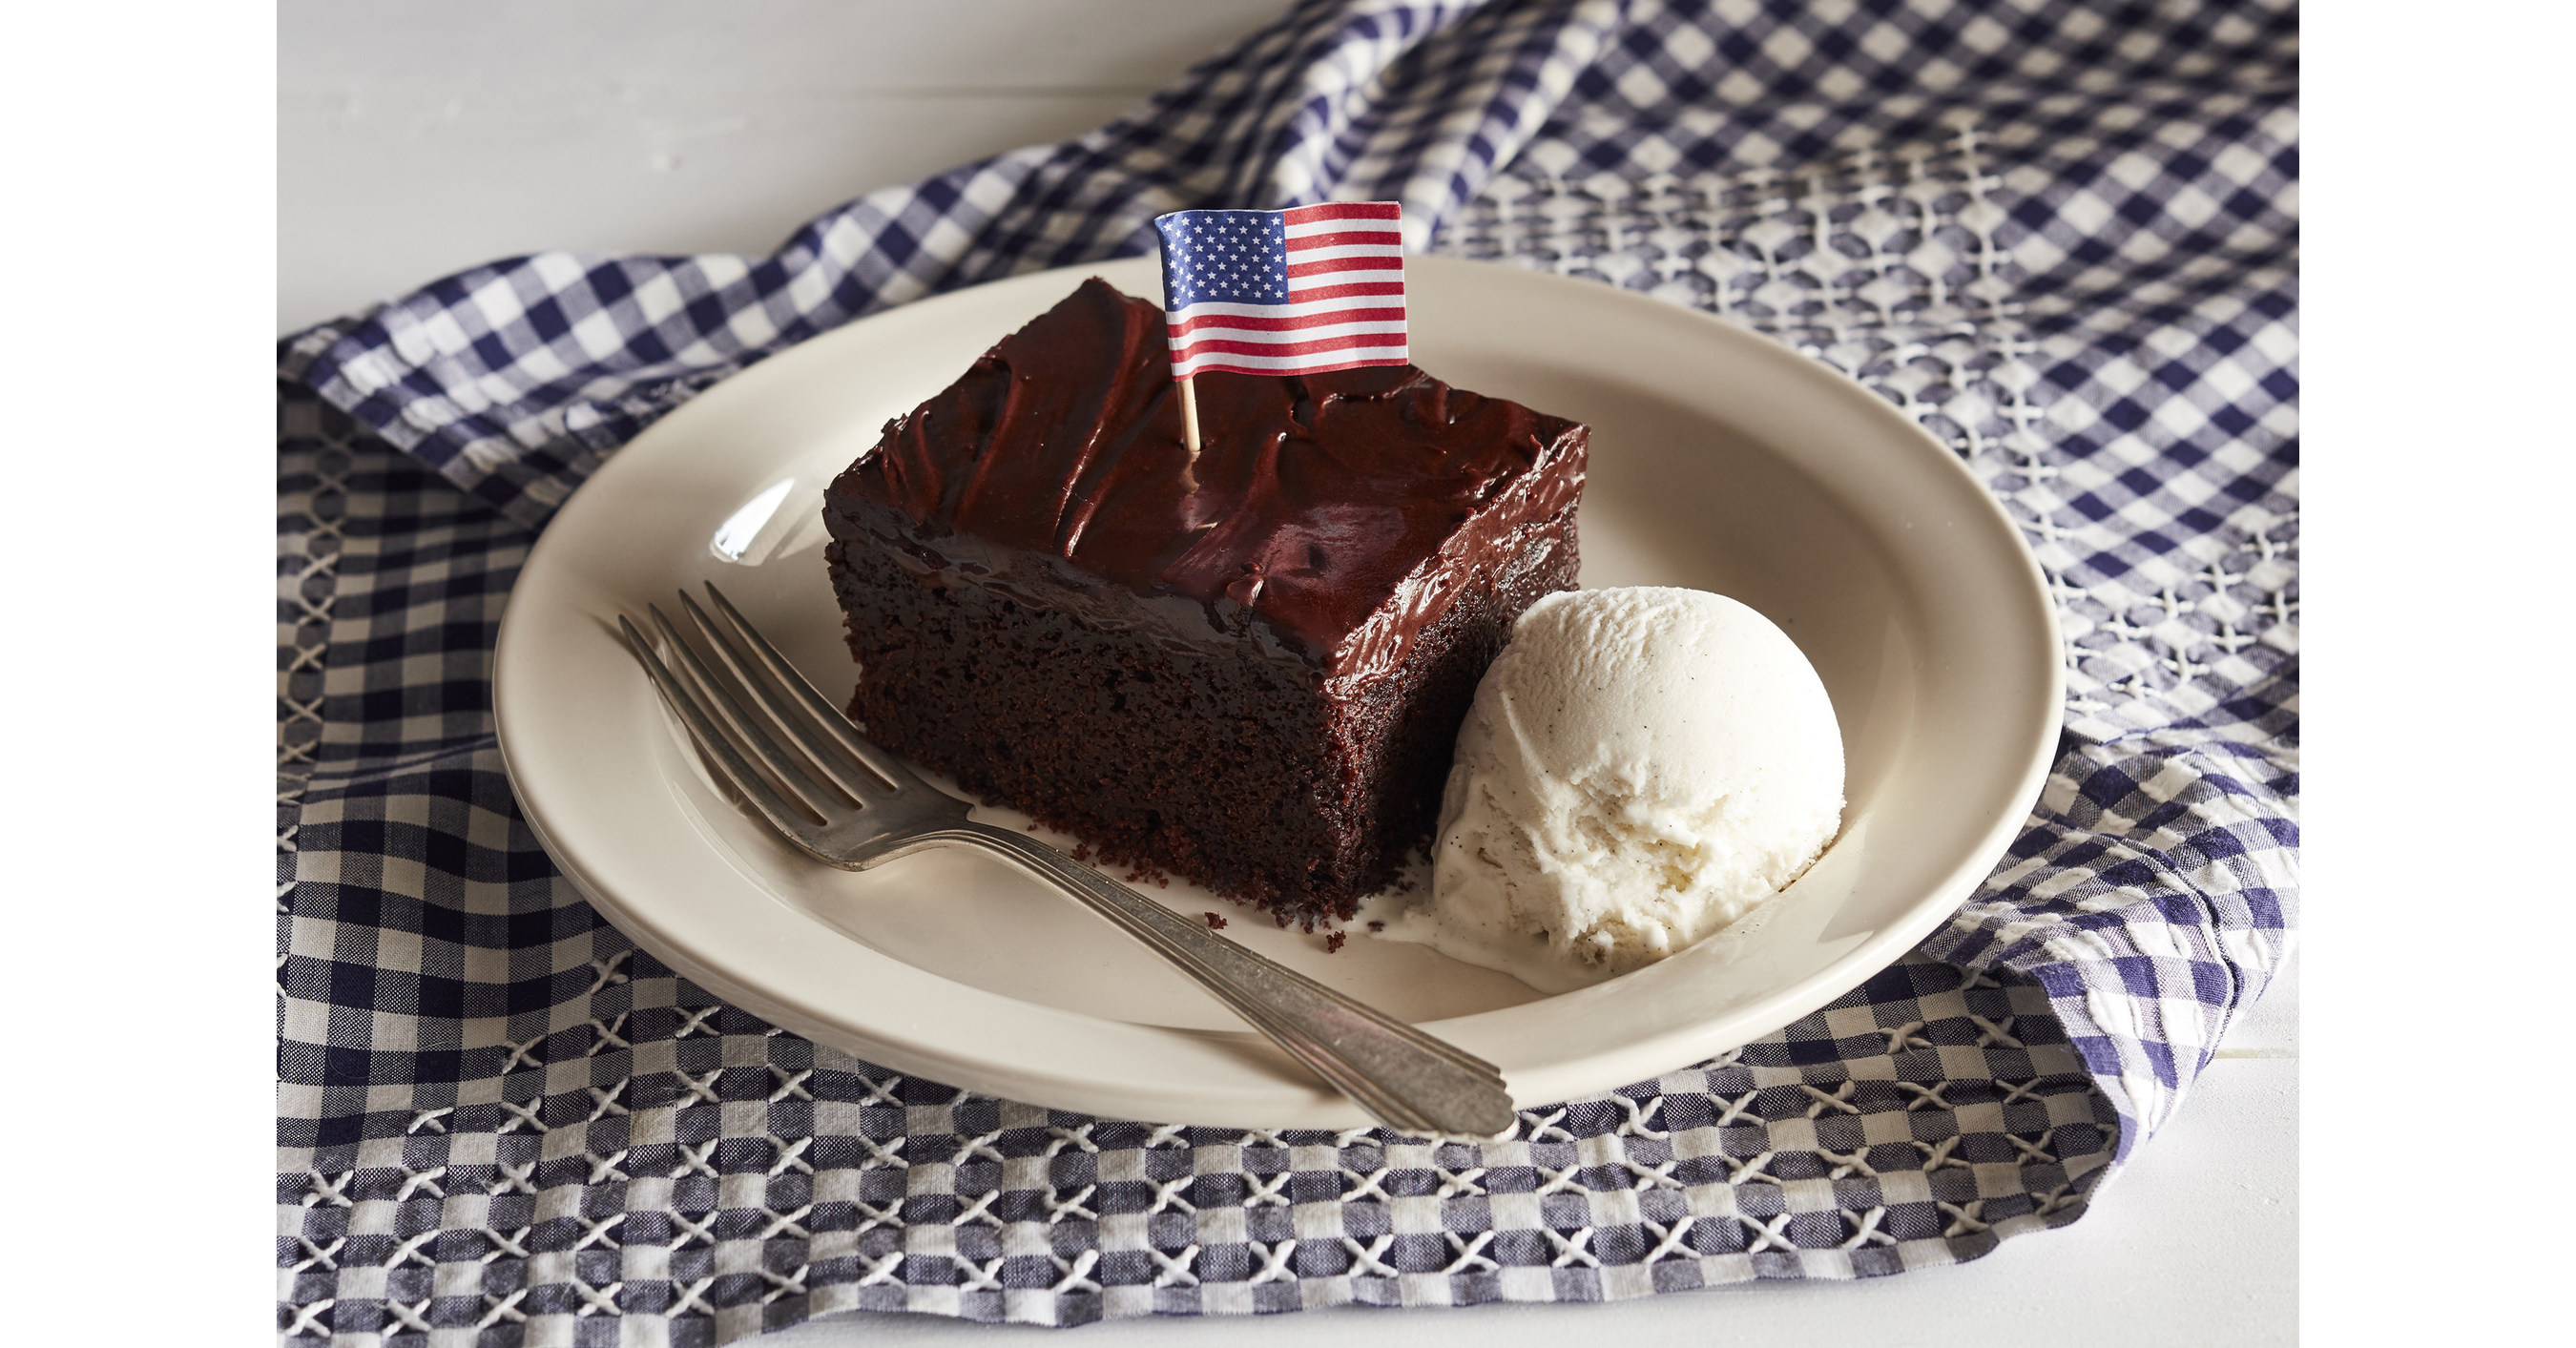 Cracker Barrel Old Country Store® Honors Our Nation's Military this